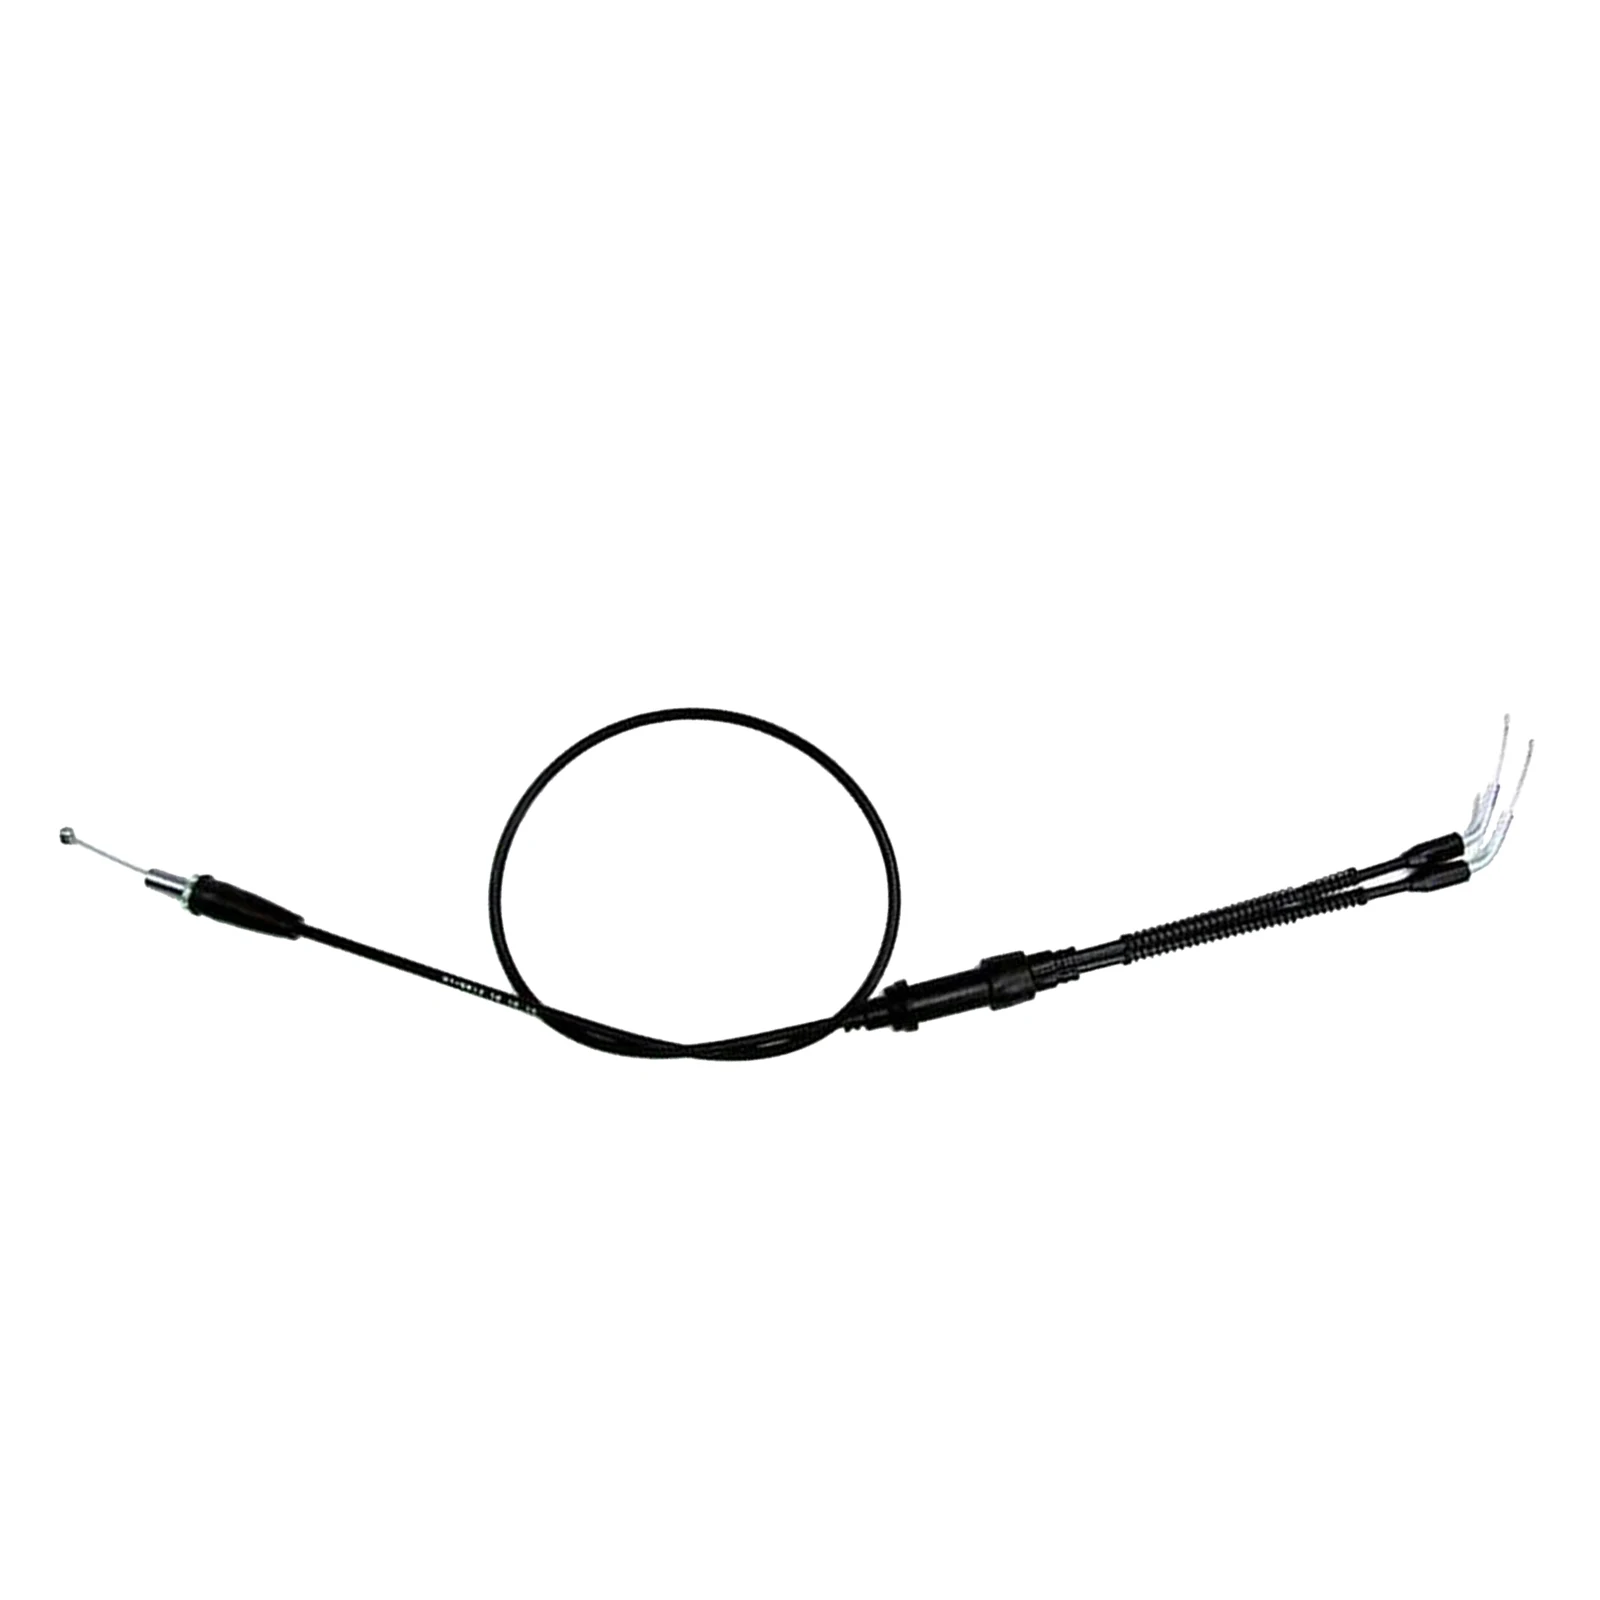 Throttle Cable Replaces  Banshee 1987 2006 350 YZ350 01 0813